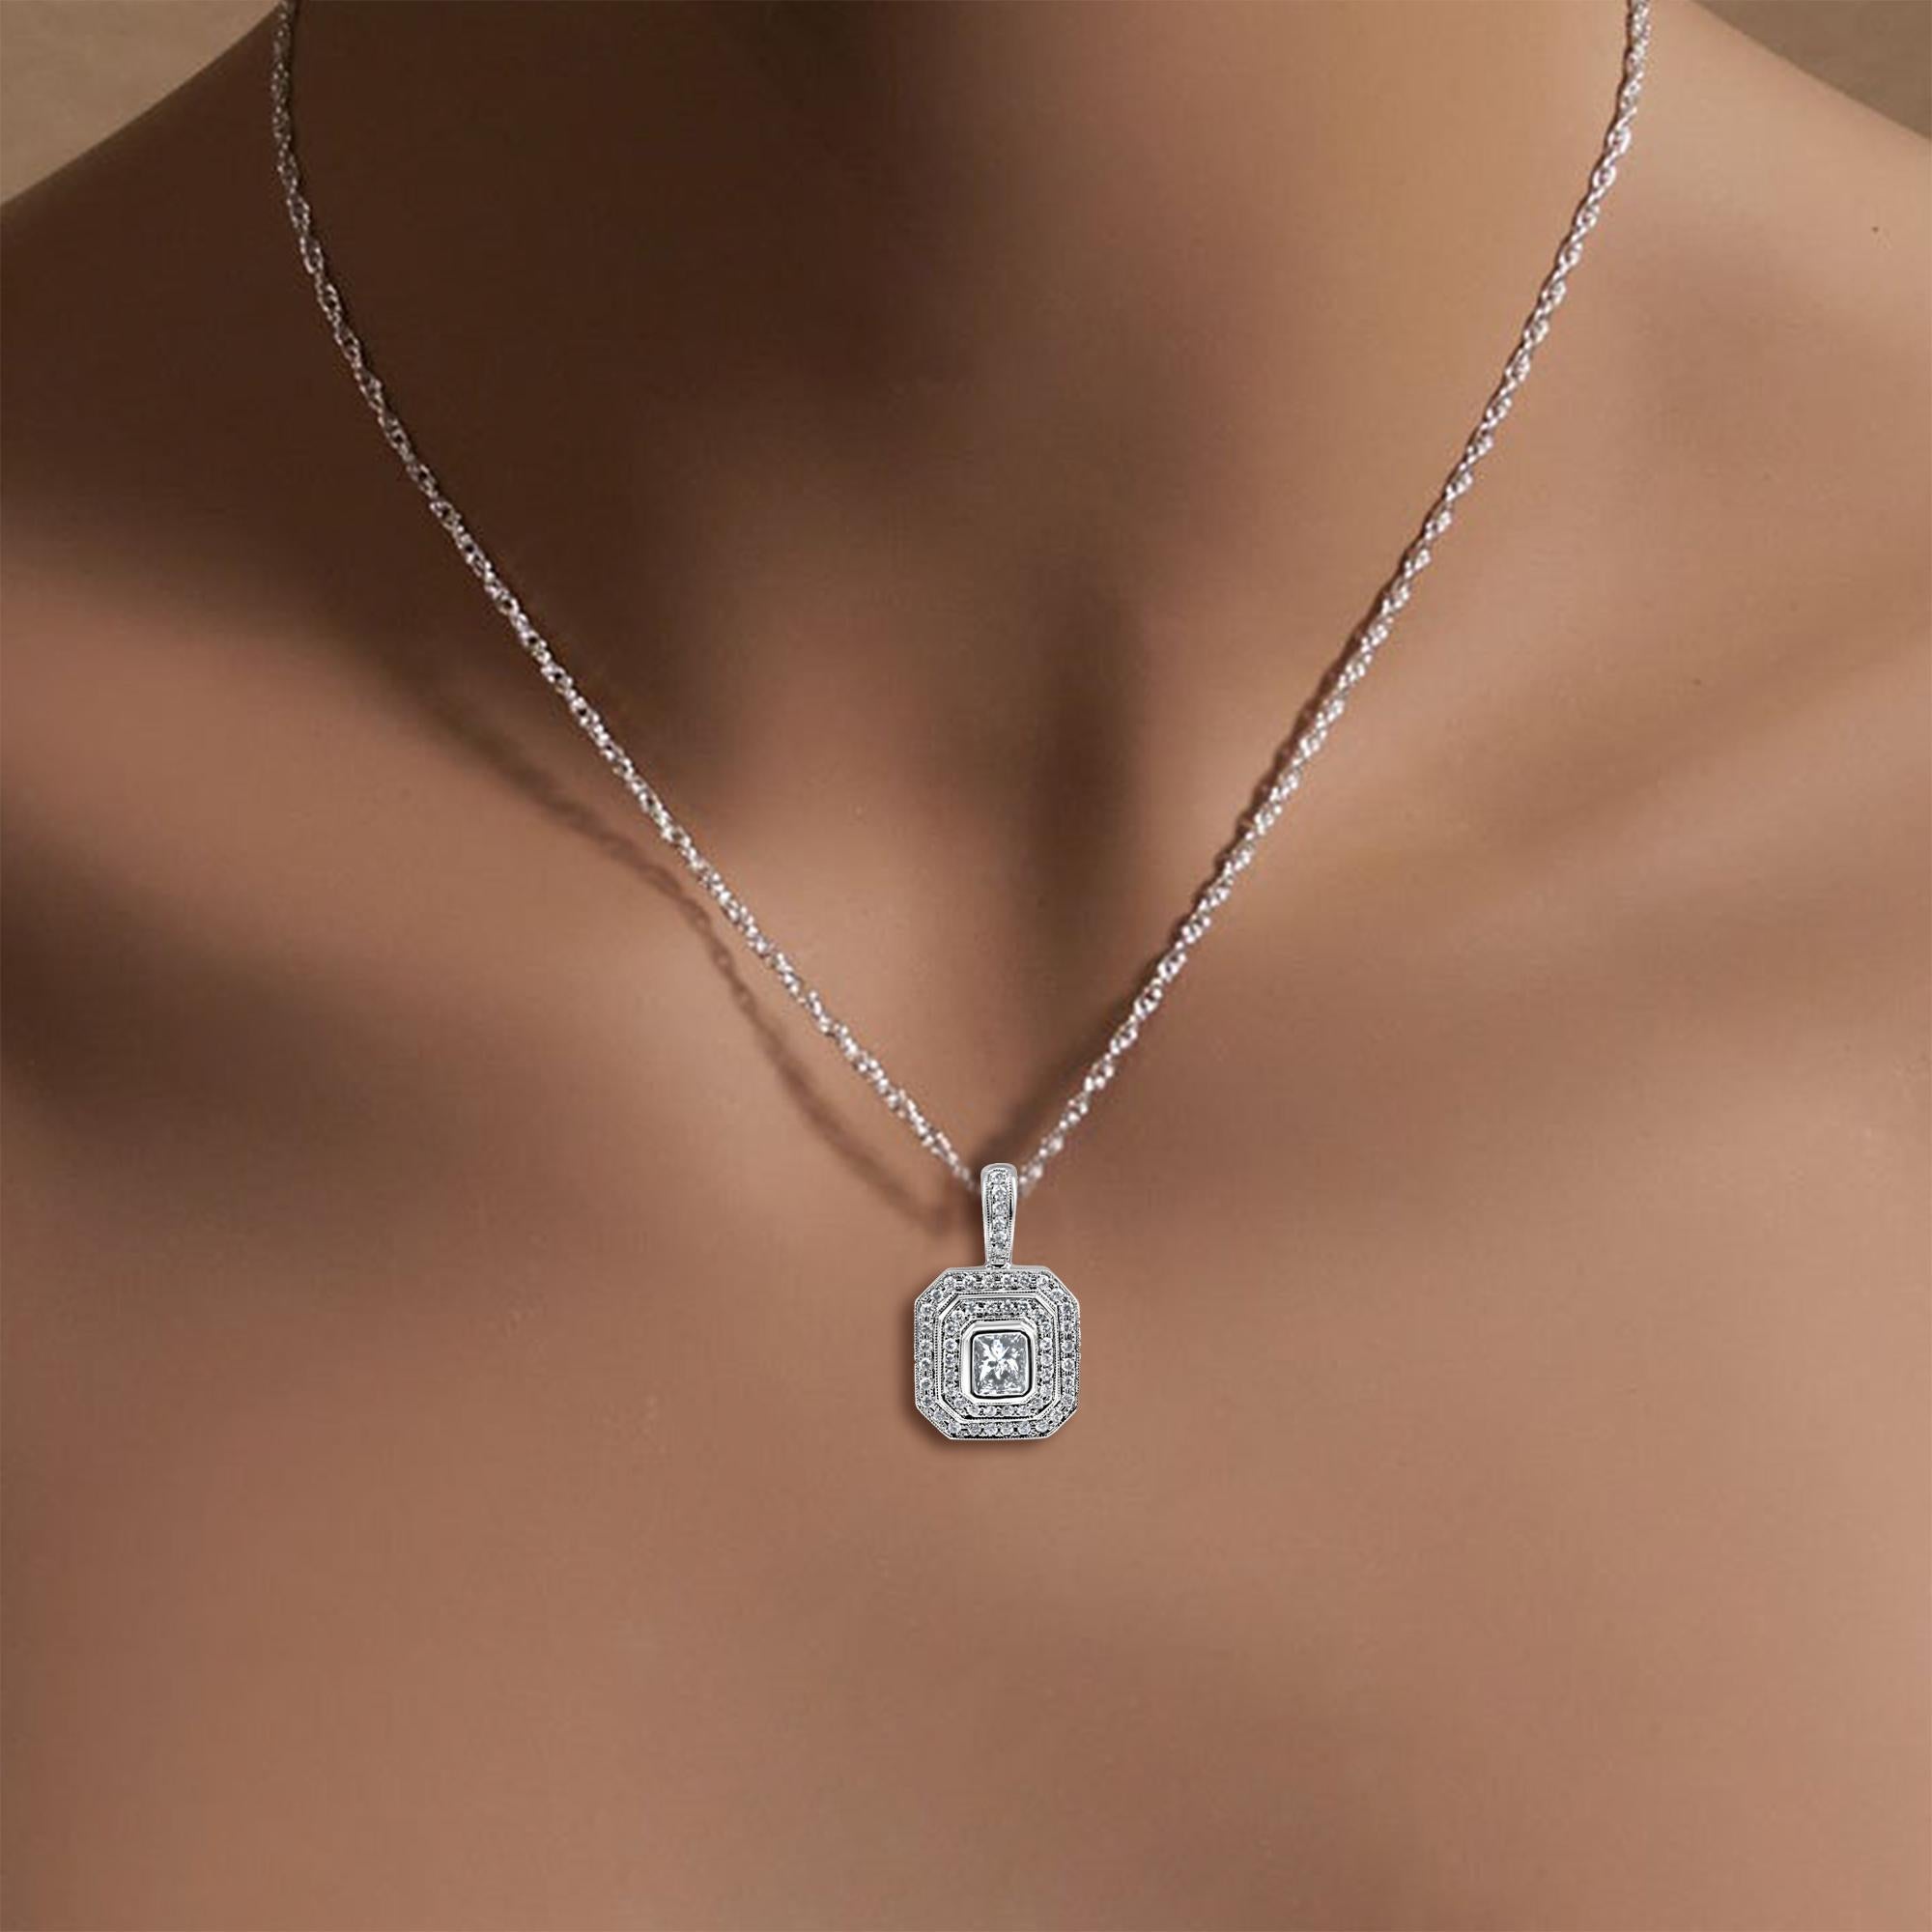 ♥ Product Summary ♥

Main Stone: Diamond 
Approx. Total Carat Weight: 1.06cttw 
Center Stone: .65ct
Accent Stones: .41ct
Stone Cut: Princess & Round
Metal Choice: 18K White Gold
Weight: 4 grams
Chain: 1.1mm Link Chain (Pendant can be sold by itself) 